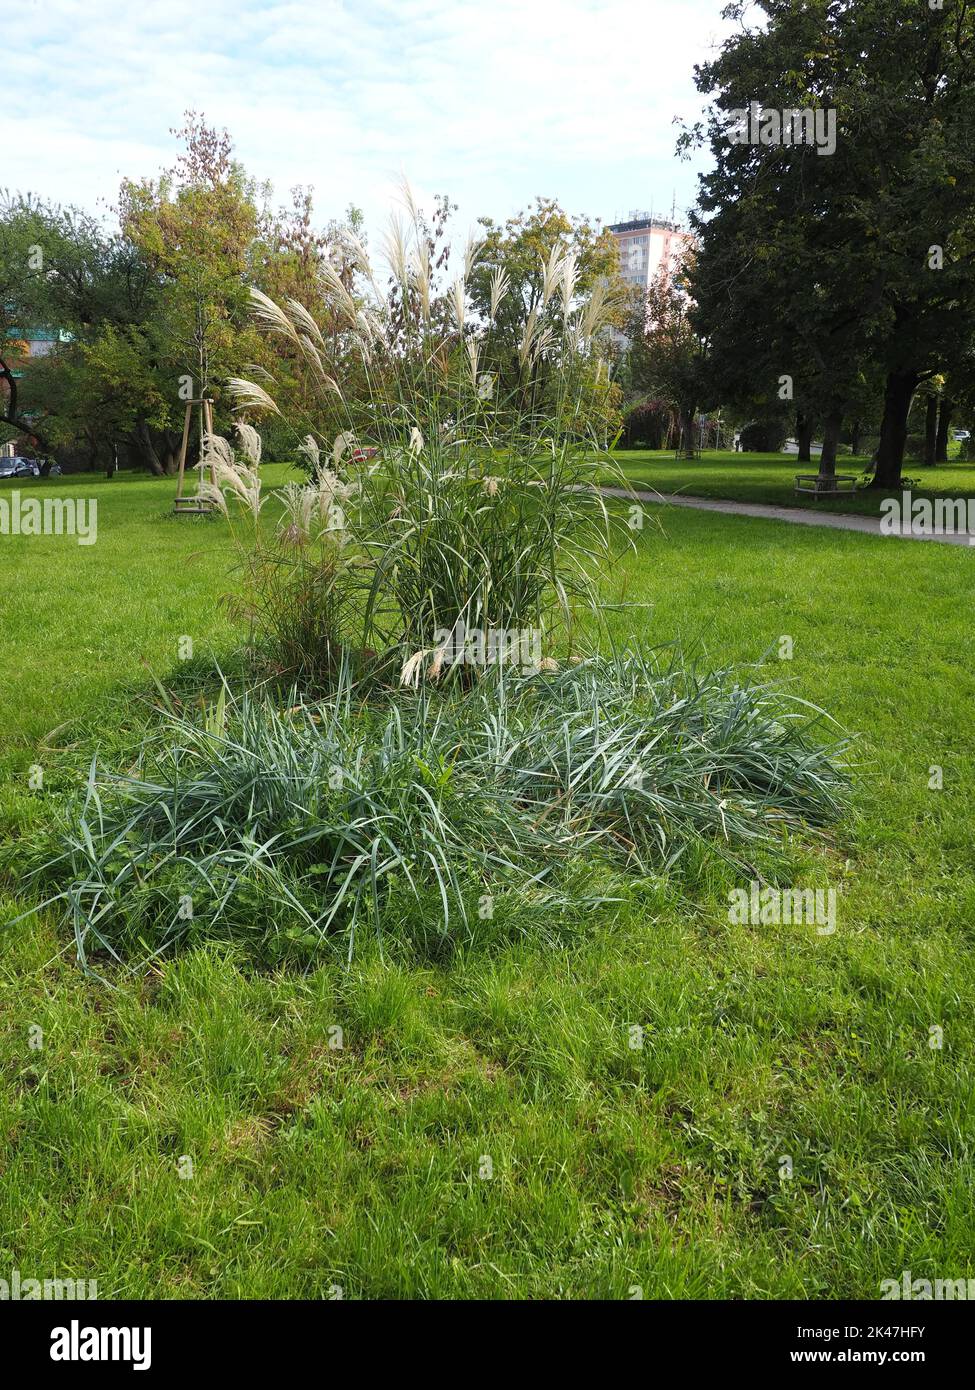 Bush of ornamental grass in a public park with a large and a small, newly planted tree in the background Stock Photo